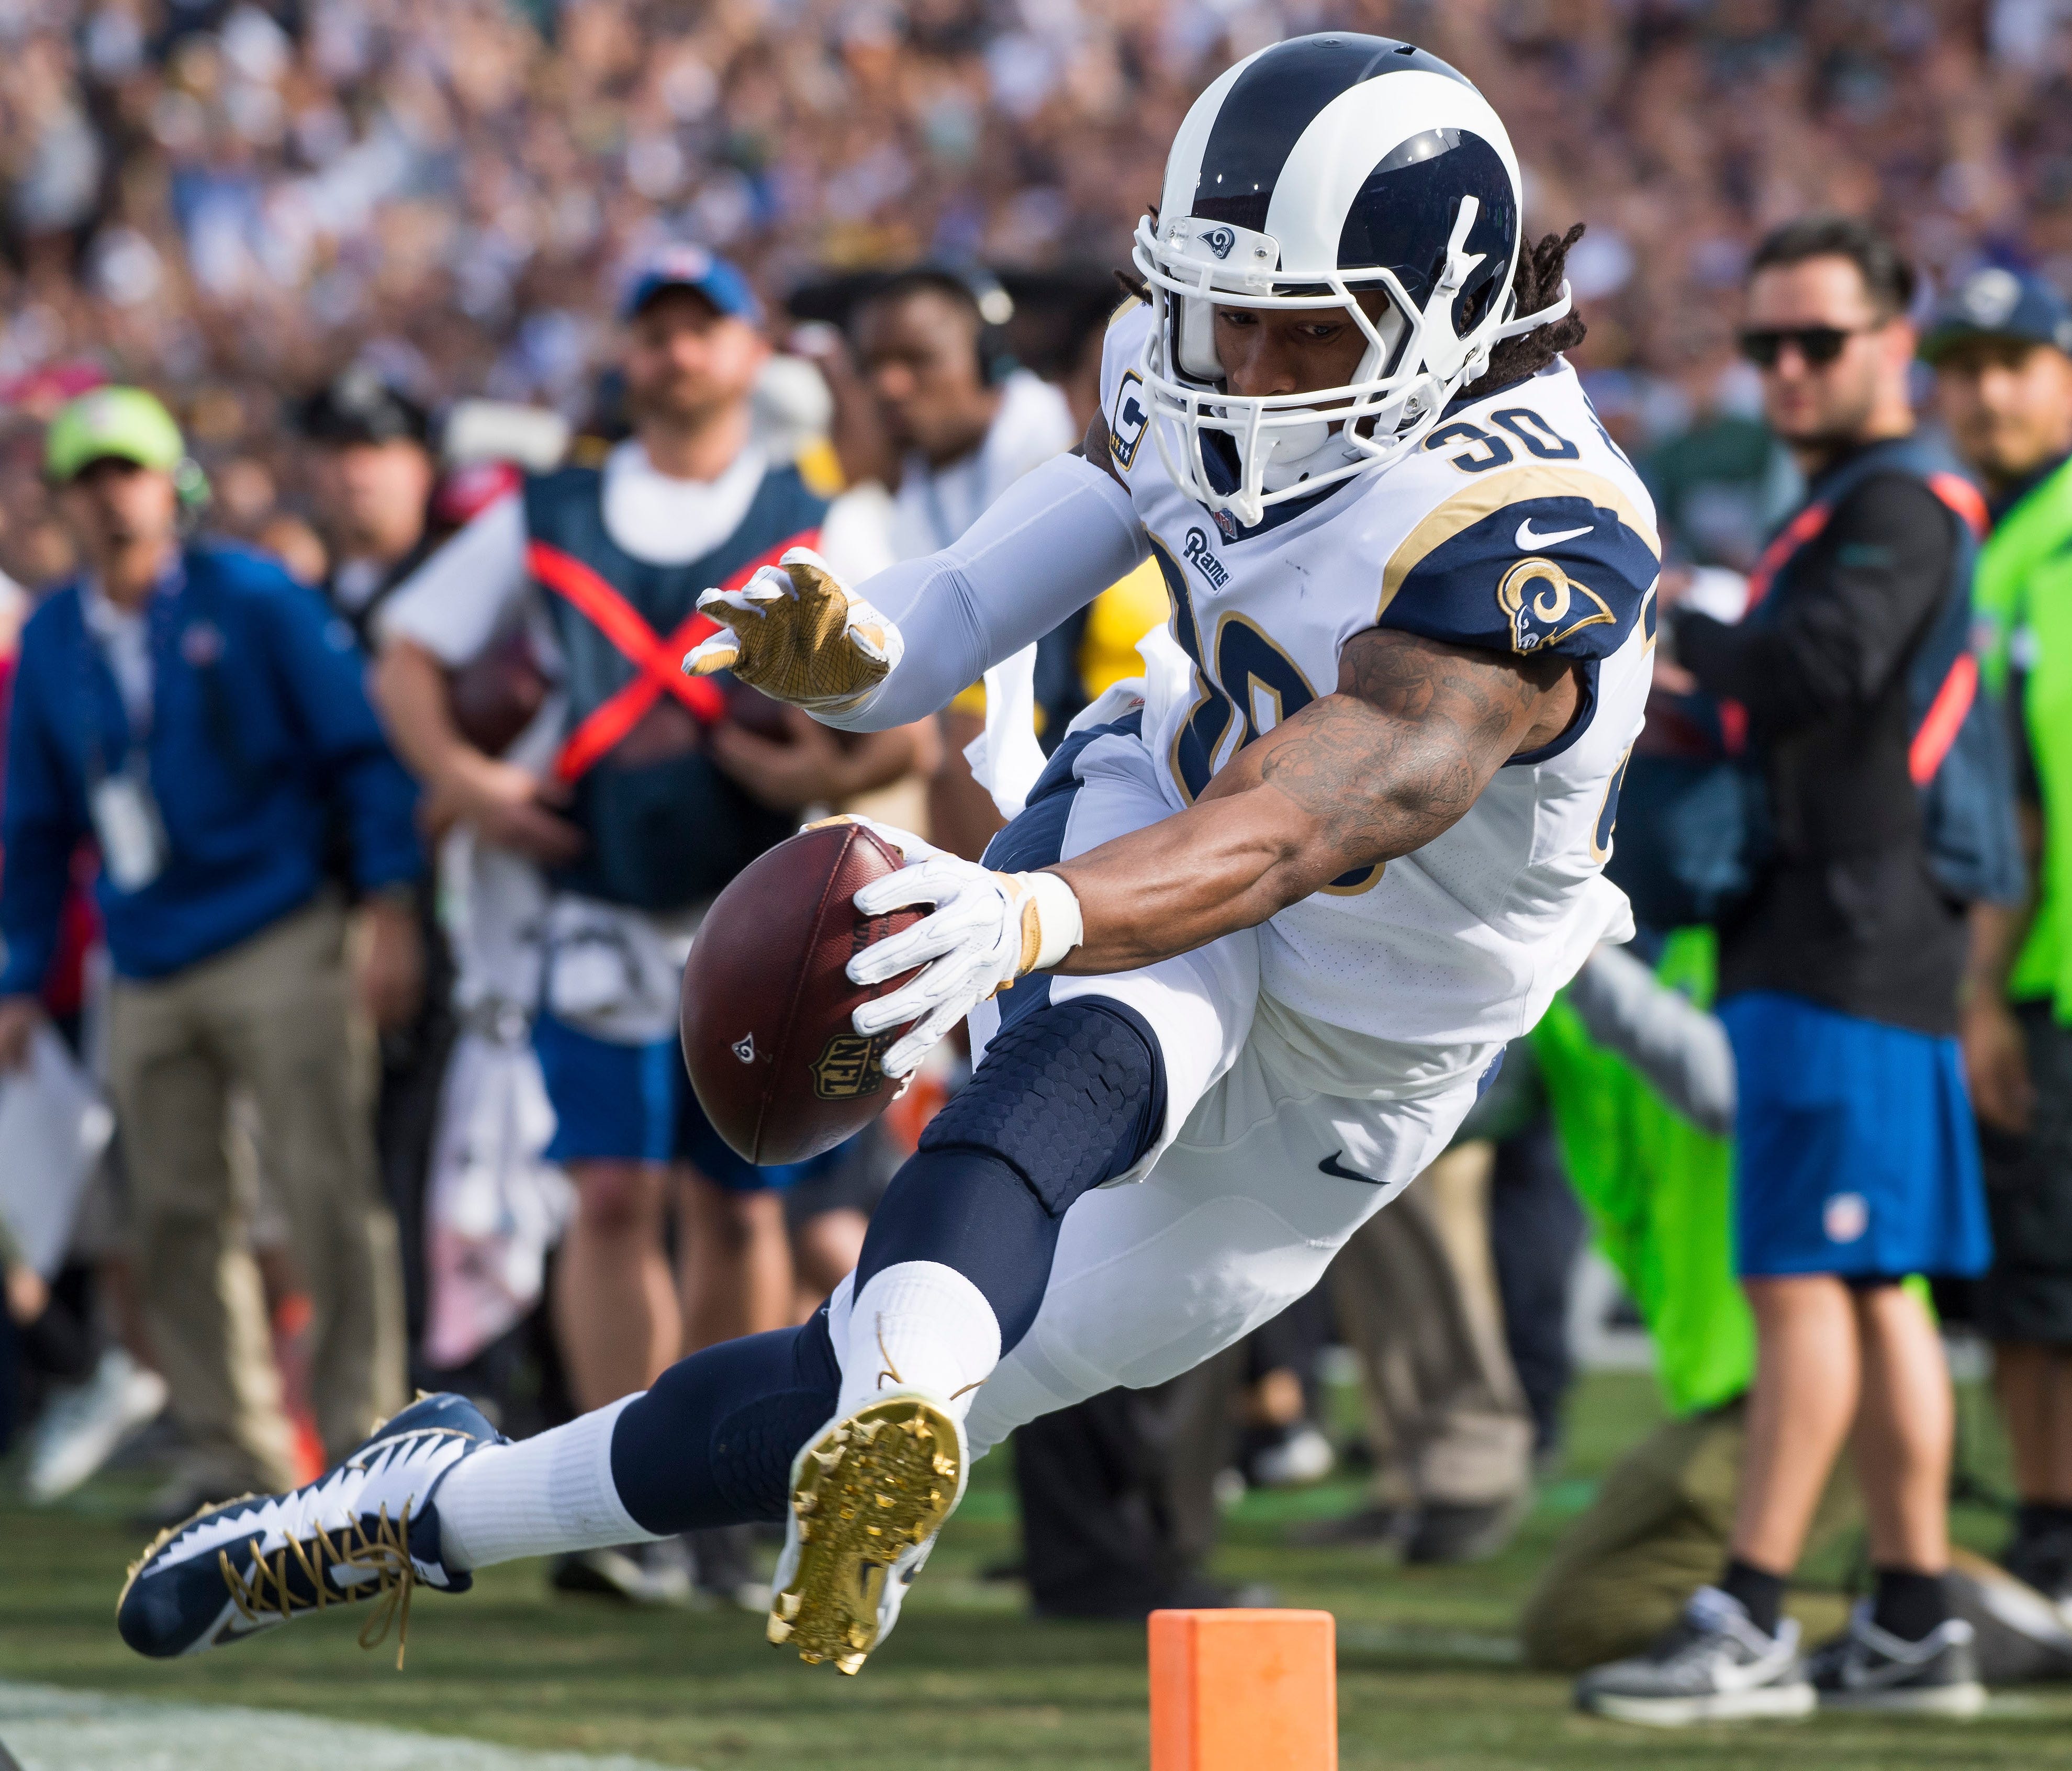 Los Angeles Rams running back Todd Gurley (30) dives toward the end zone during a long first quarter run but is pushed out of bounds two yards short of the end zone against the Philadelphia Eagles at Los Angeles Memorial Coliseum.